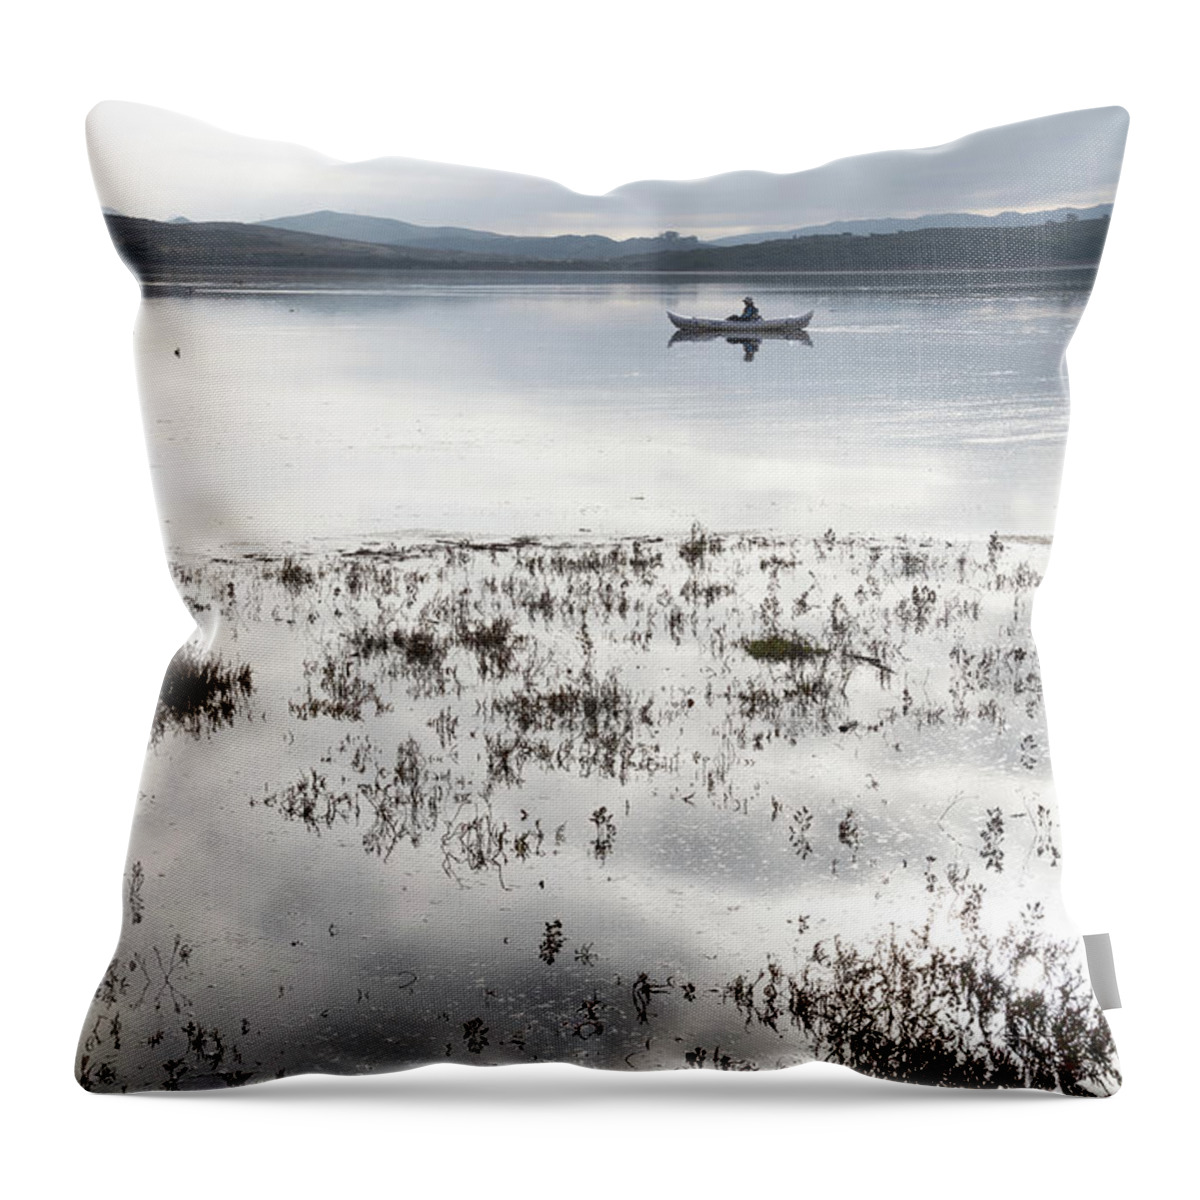  Throw Pillow featuring the photograph Morro Bay Estuary #1 by Lars Mikkelsen